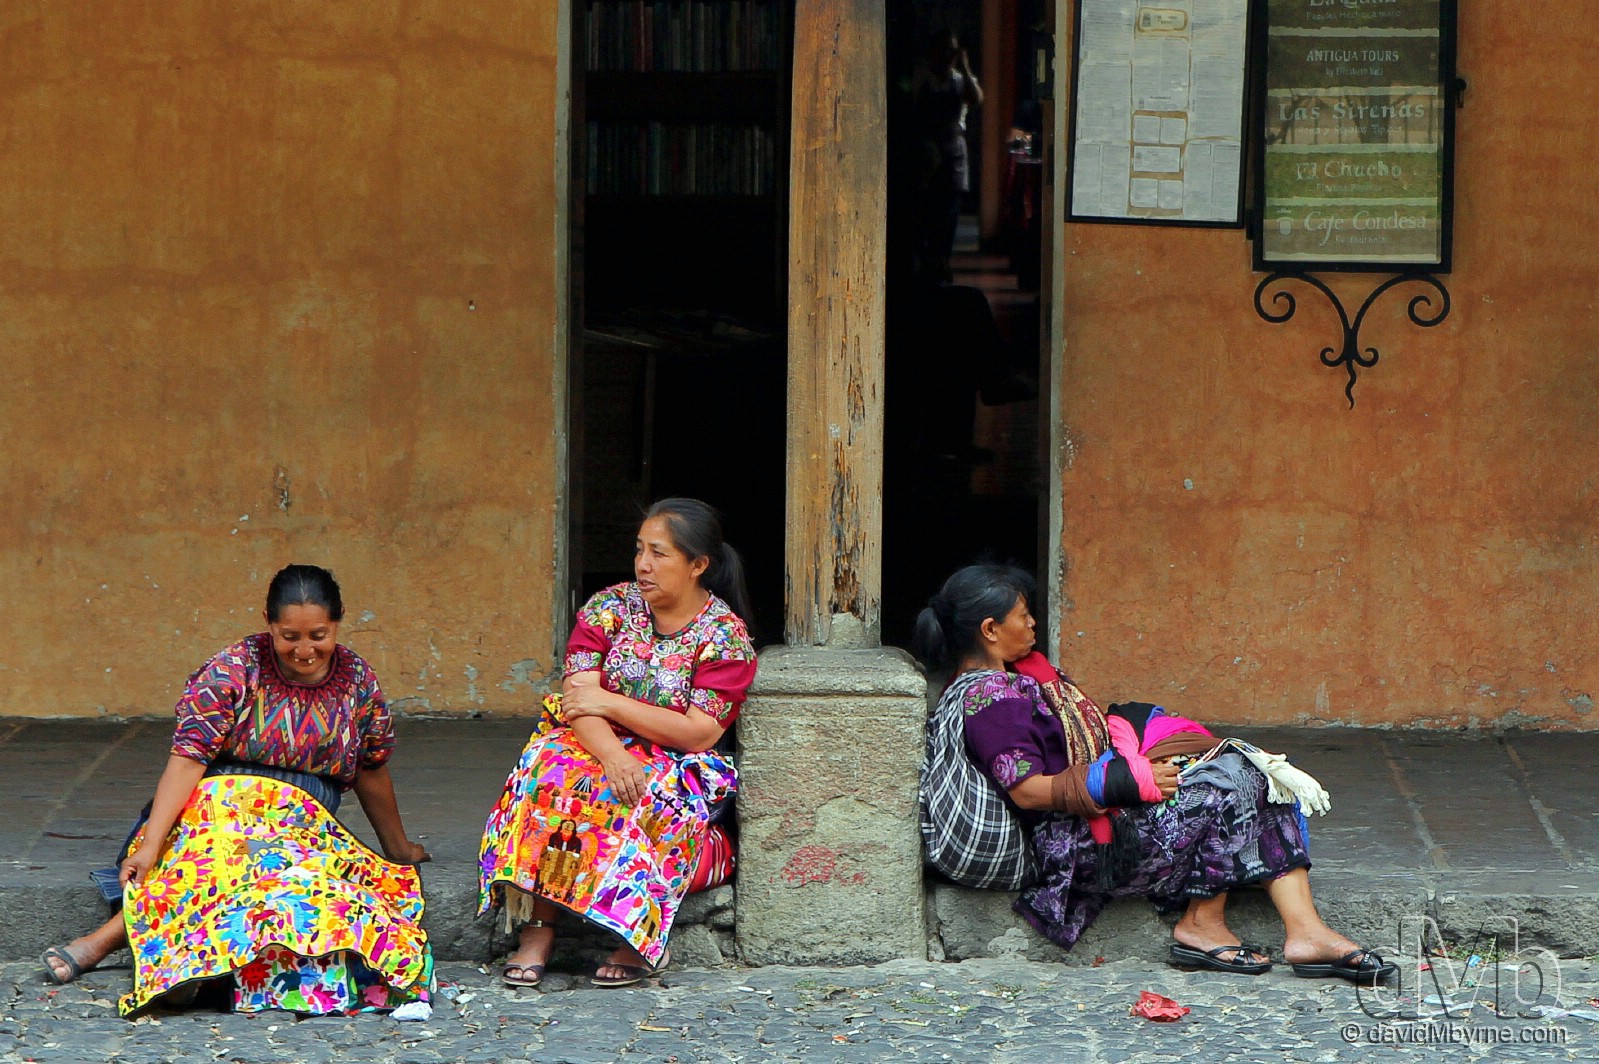 Three Mayan ladies taking a break from peddling their wares by the edge of Parque Central, Antigua, Guatemala. May 19th, 2013 (EOS 60D || Tamron 28-75 || 75mm, 1/250sec, f/4.5, iso100)